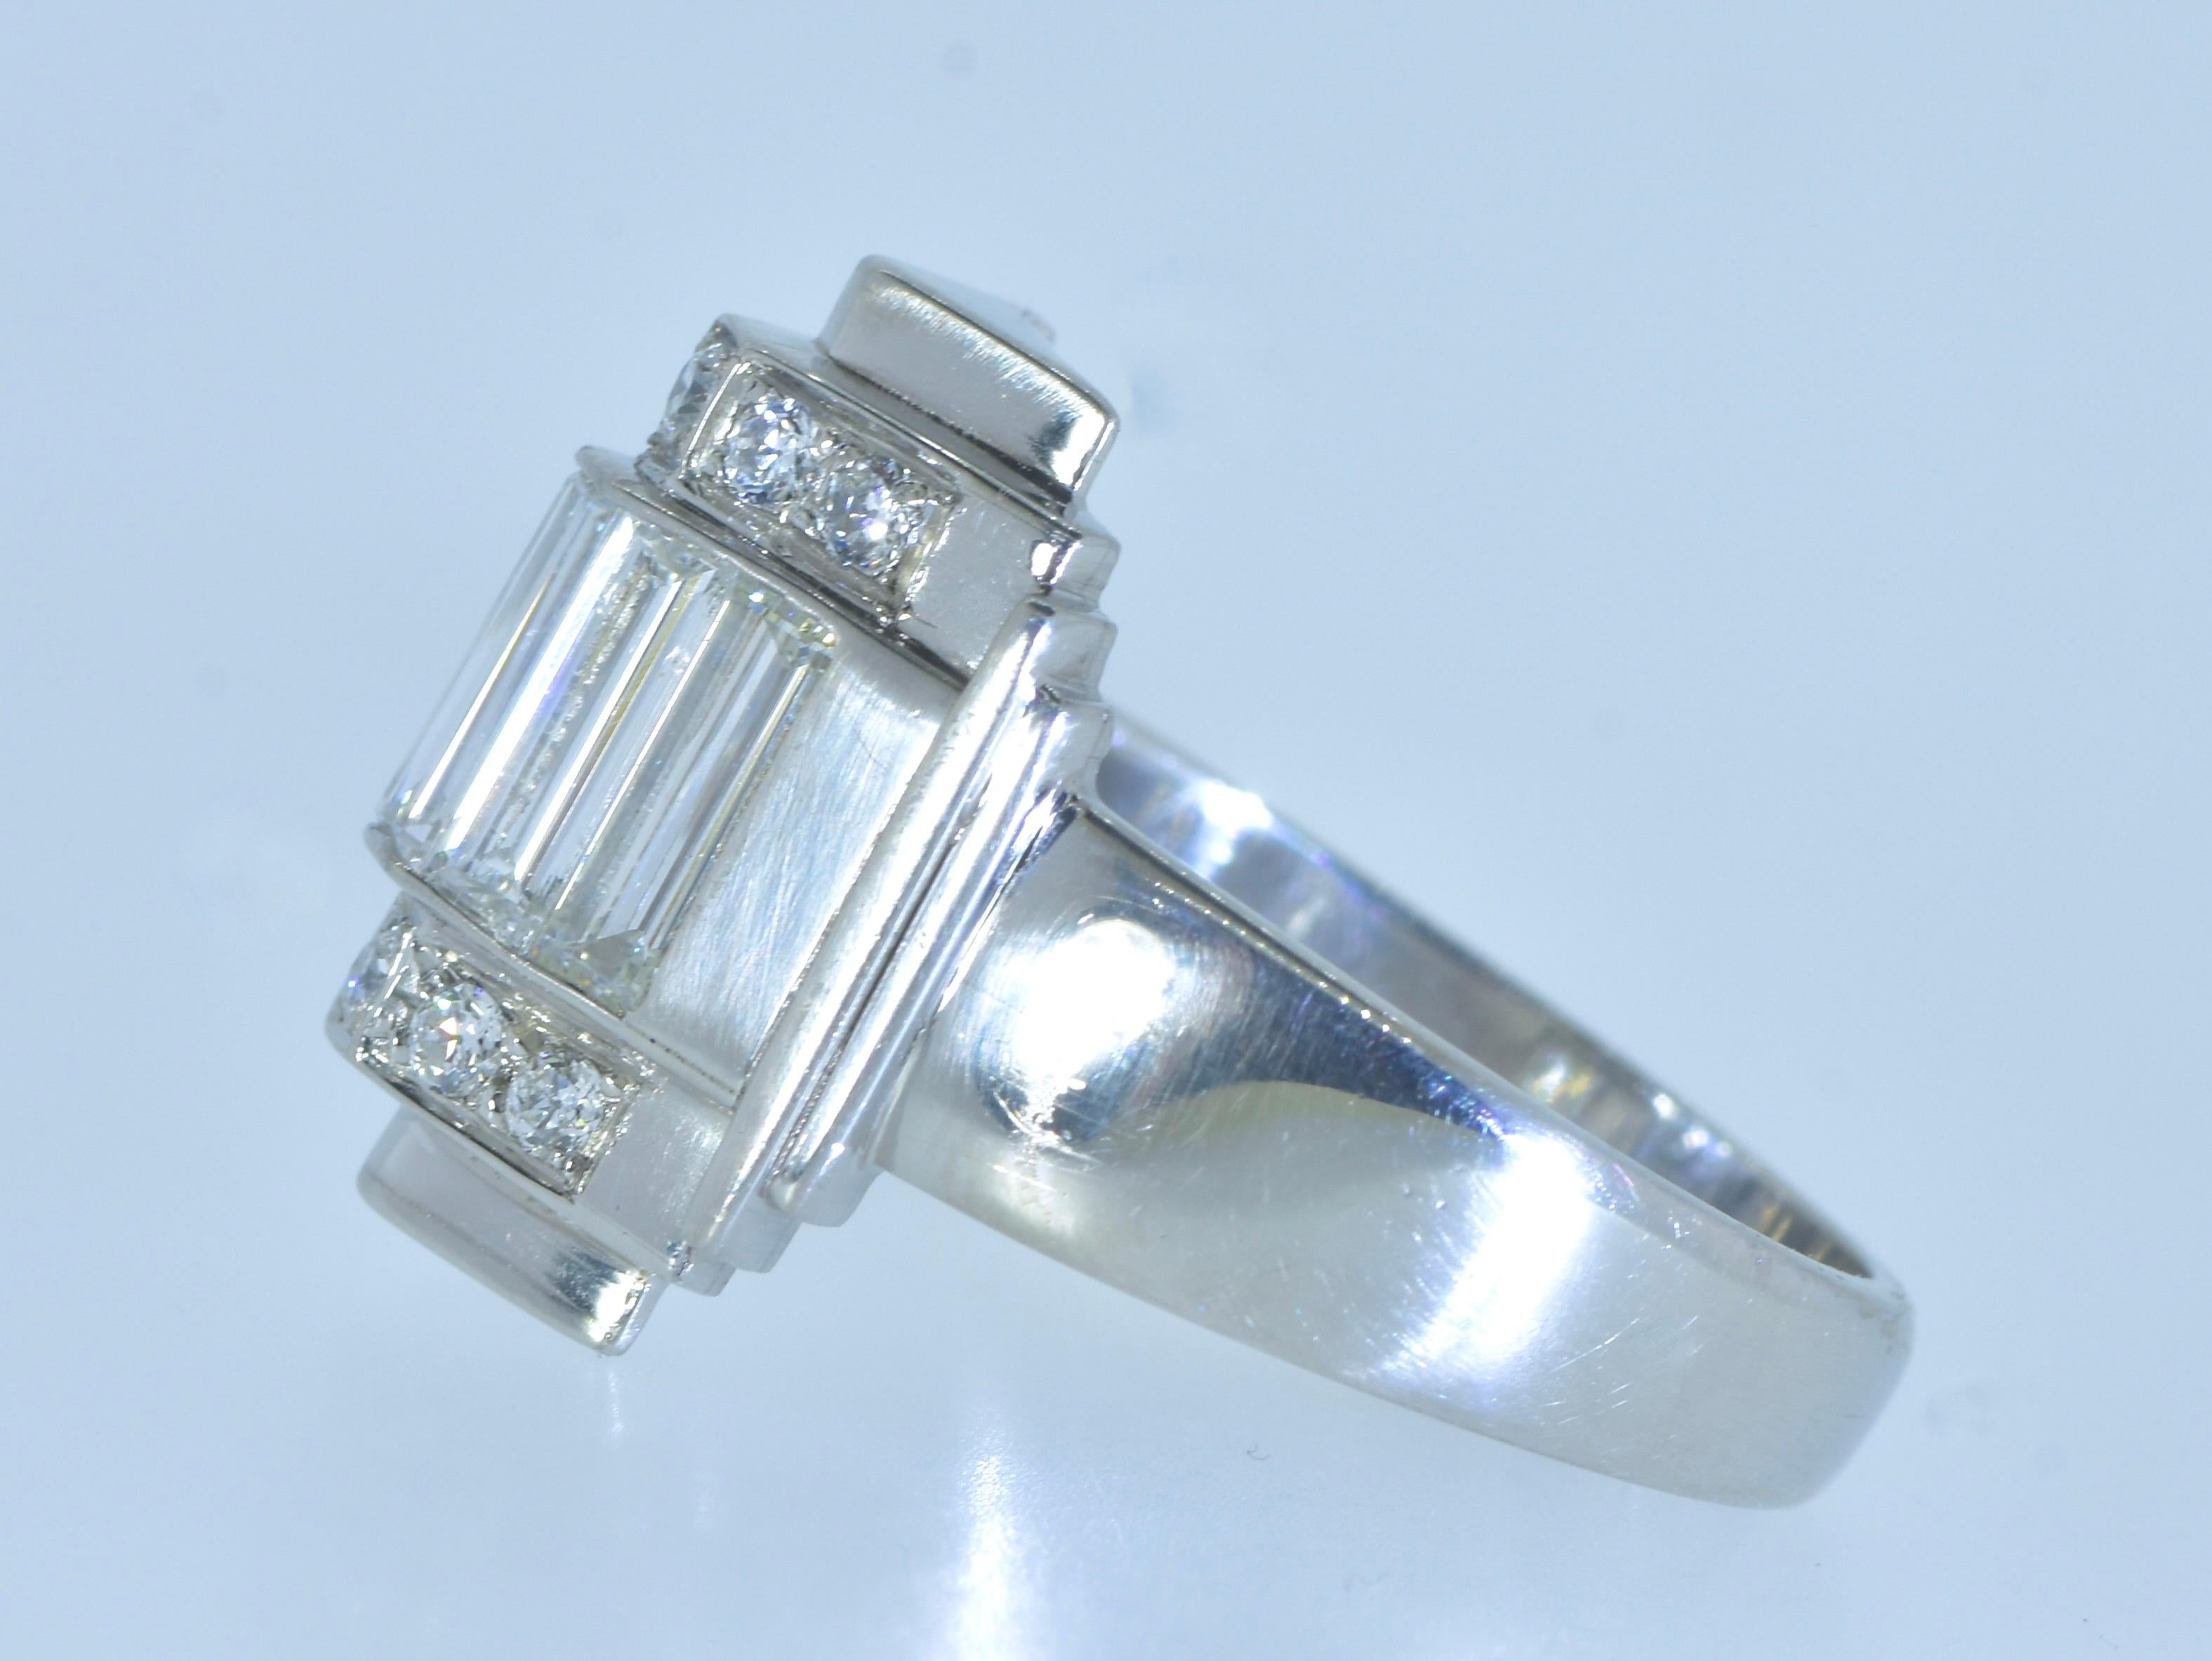 Art Deco Diamond Ring.  Long baguette cut white diamonds centers this geometric statement.  The diamonds are all white, near colorless (H) and very slightly included (VS).  The smaller diamonds accenting the major diamonds are also of the same fine